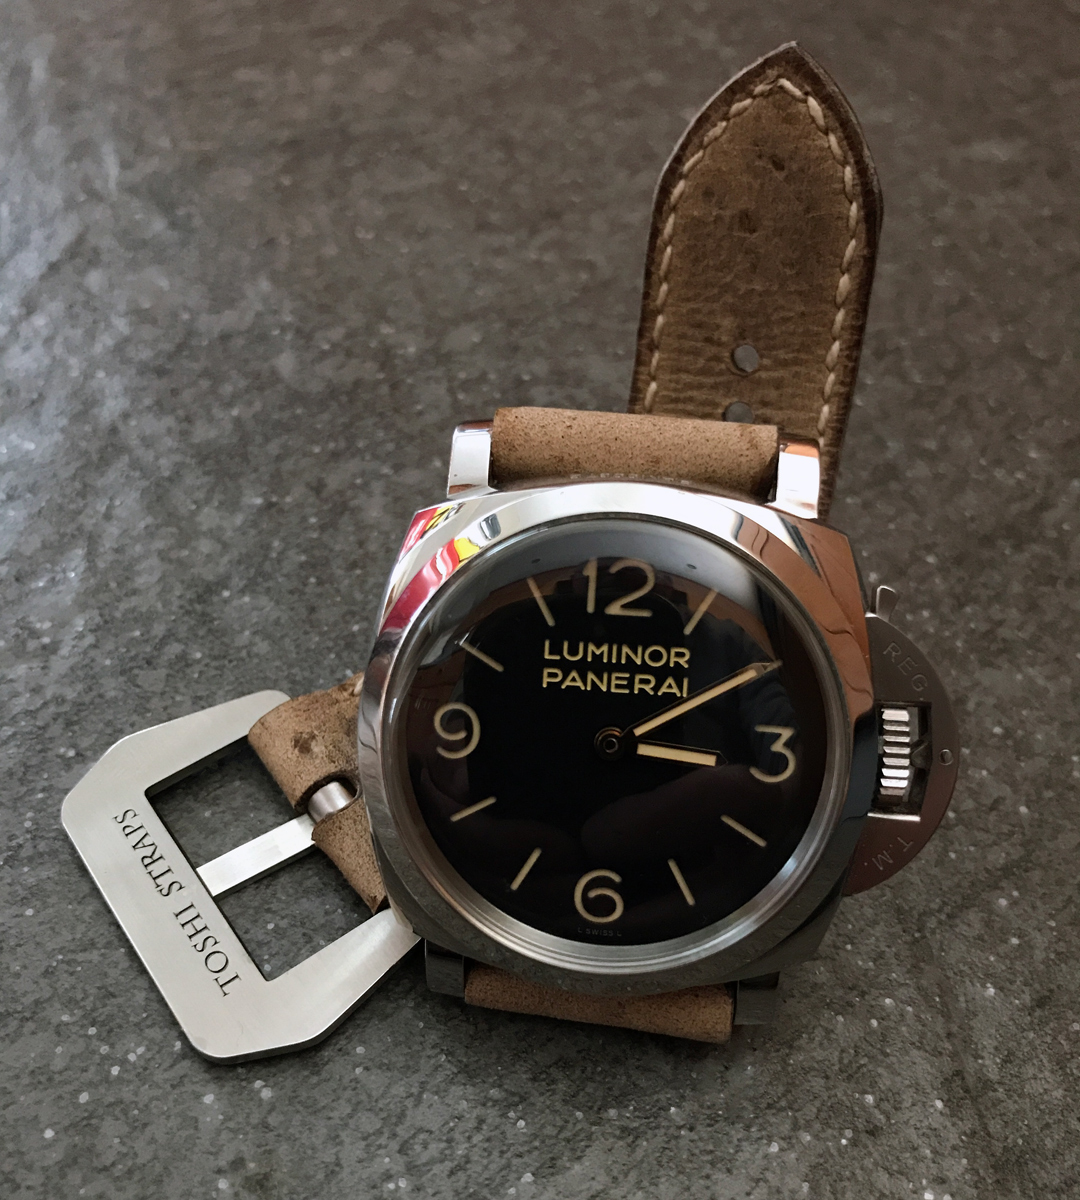 Panerai 372 on African Kudu leather with natural stitching. © Steve Rumney